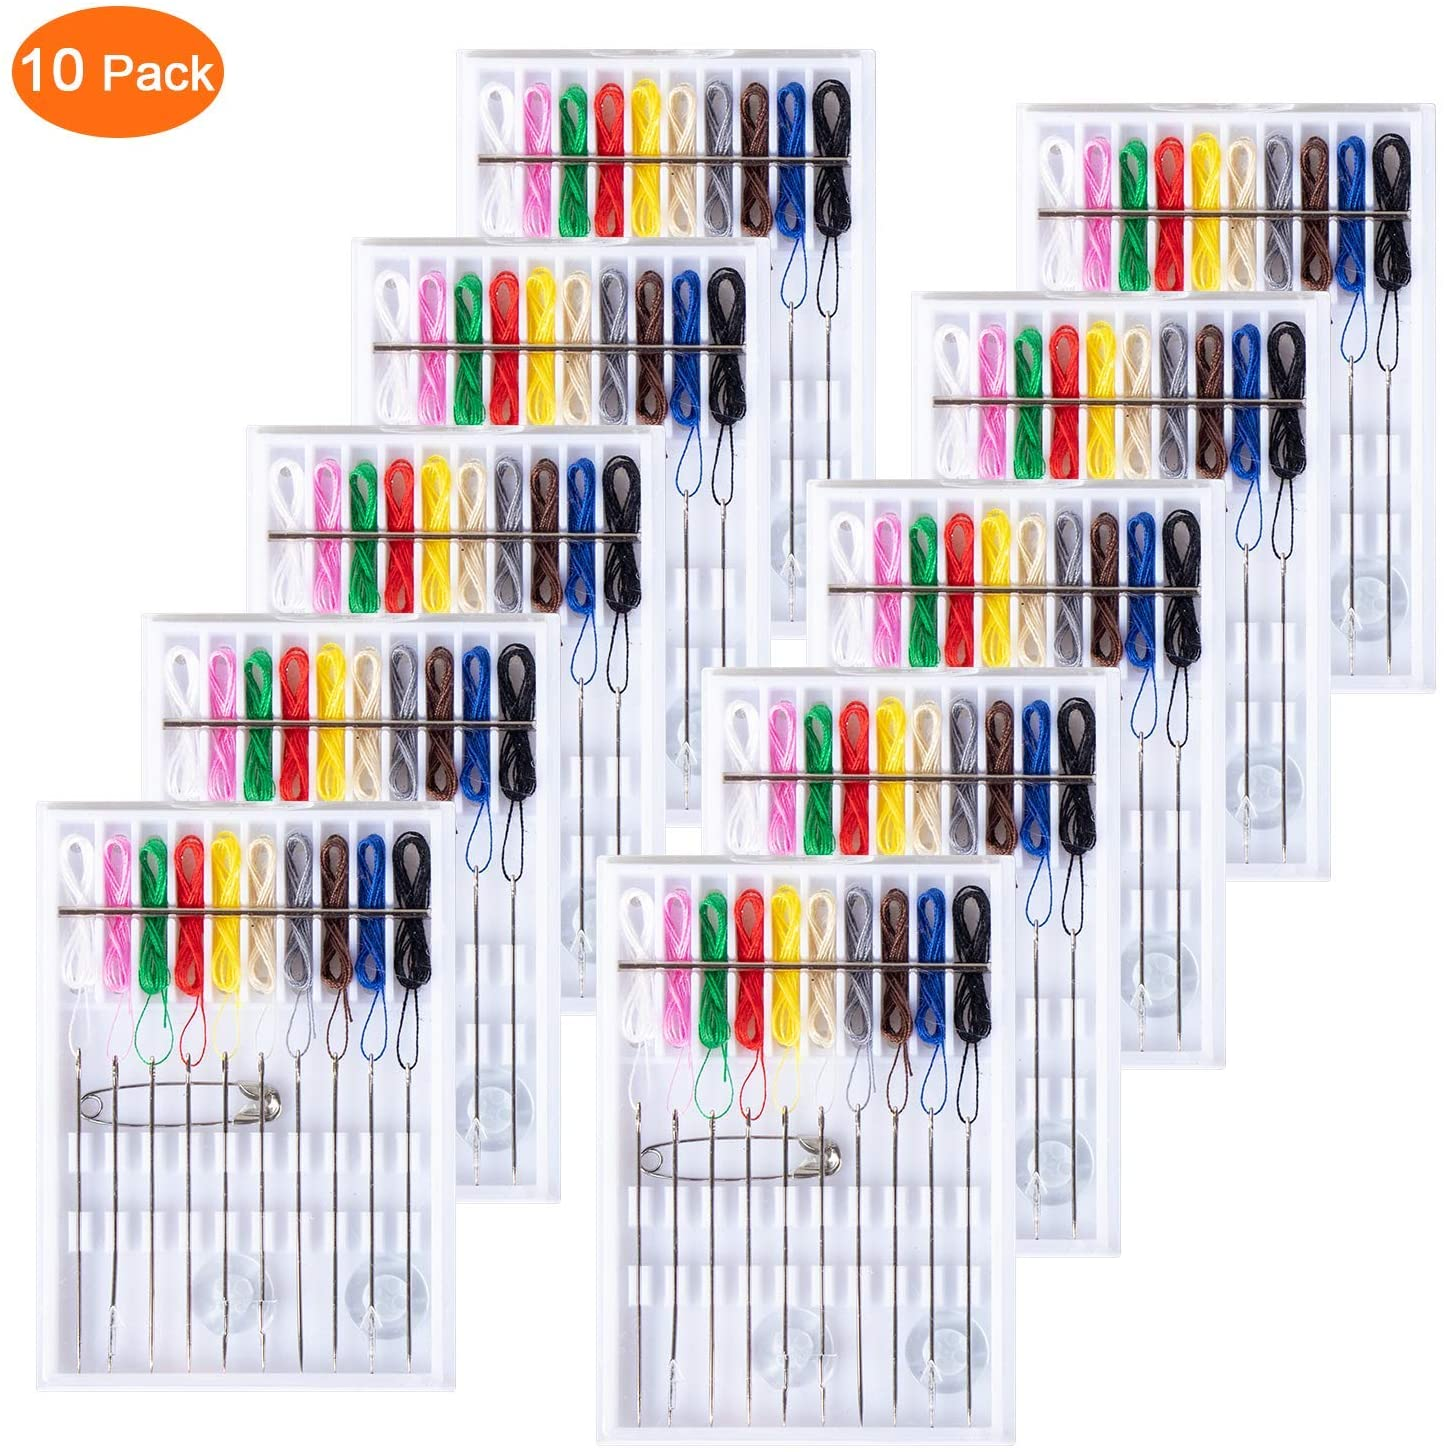 Sofire 10 Boxes Home and Travel Quick Fix Sewing Kit Pre Threaded Needle Kit, Each Box with 10 Pieces